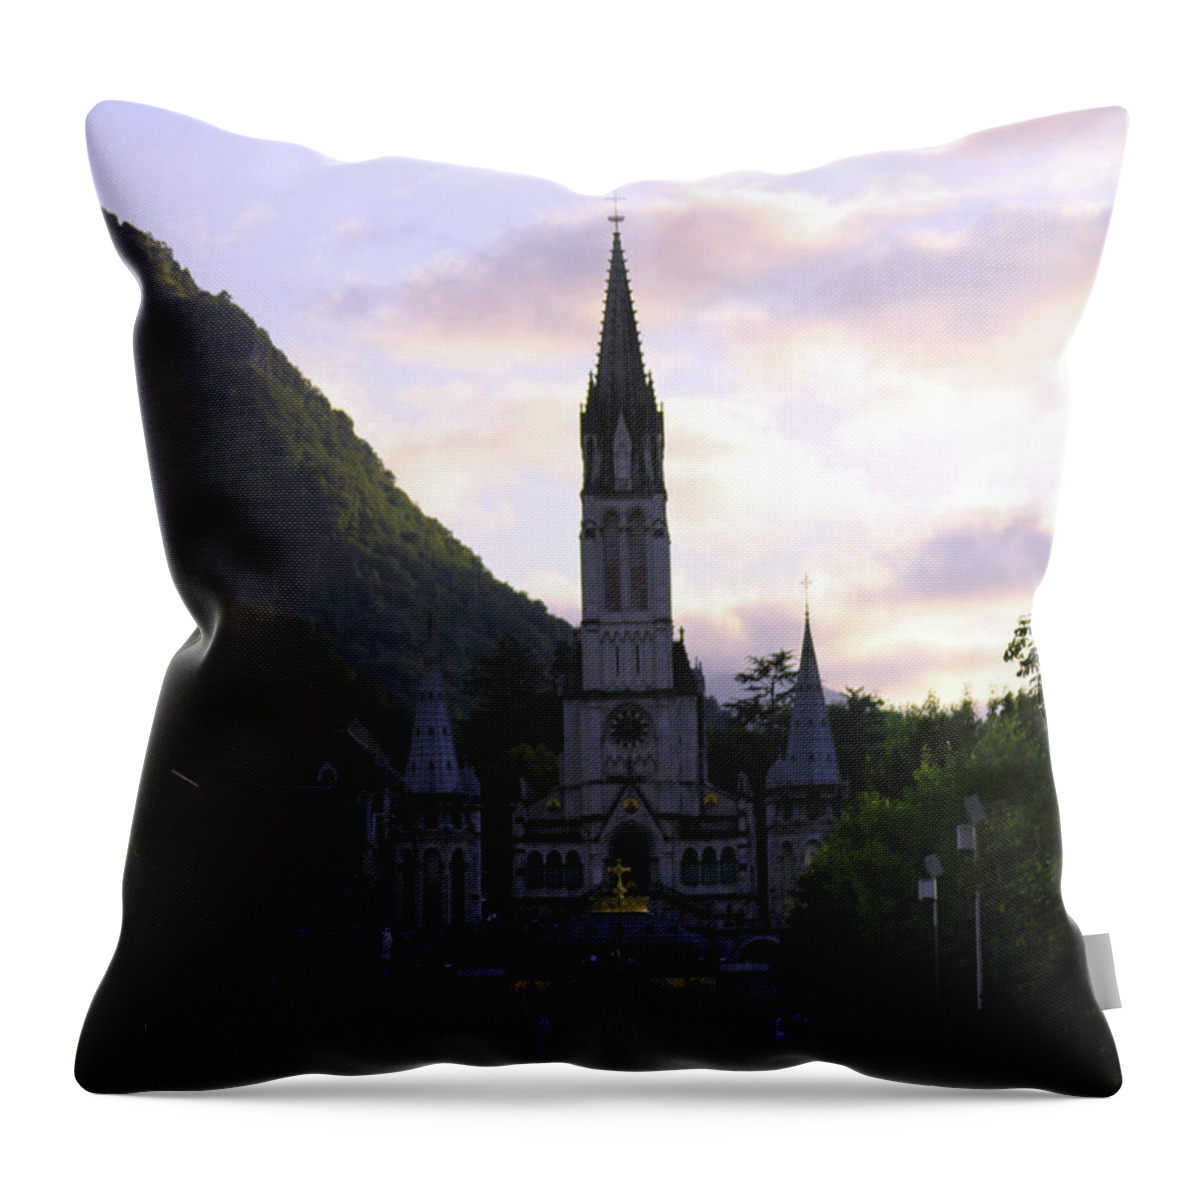 Sanctuary Of Our Lady Of Lourdes Throw Pillow featuring the photograph Sanctuary by Yousif Hadaya